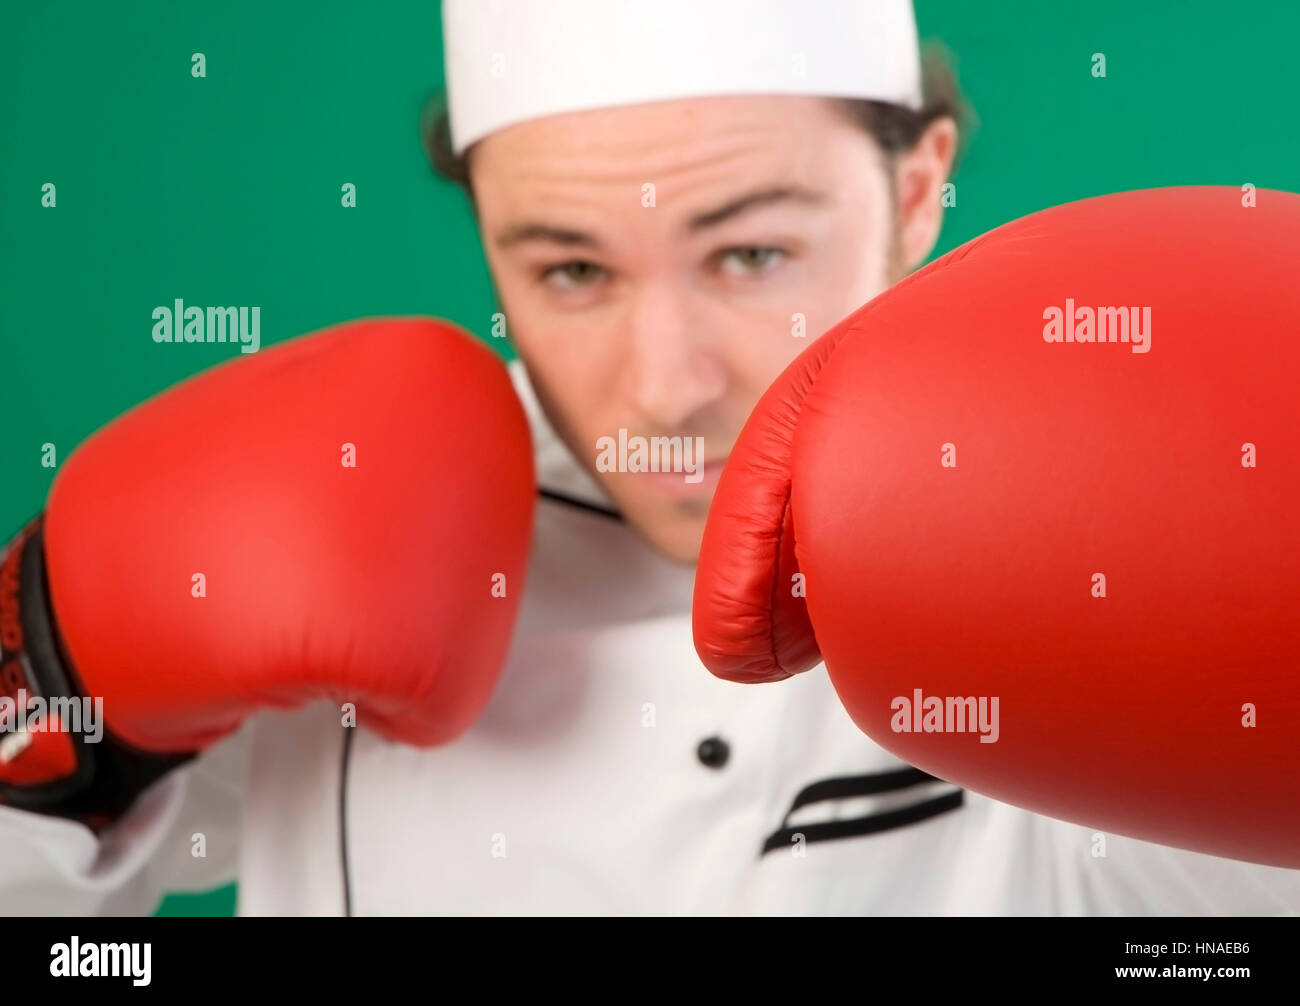 Koch mit Boxhandschuhen - cook with boxing gloves Stock Photo